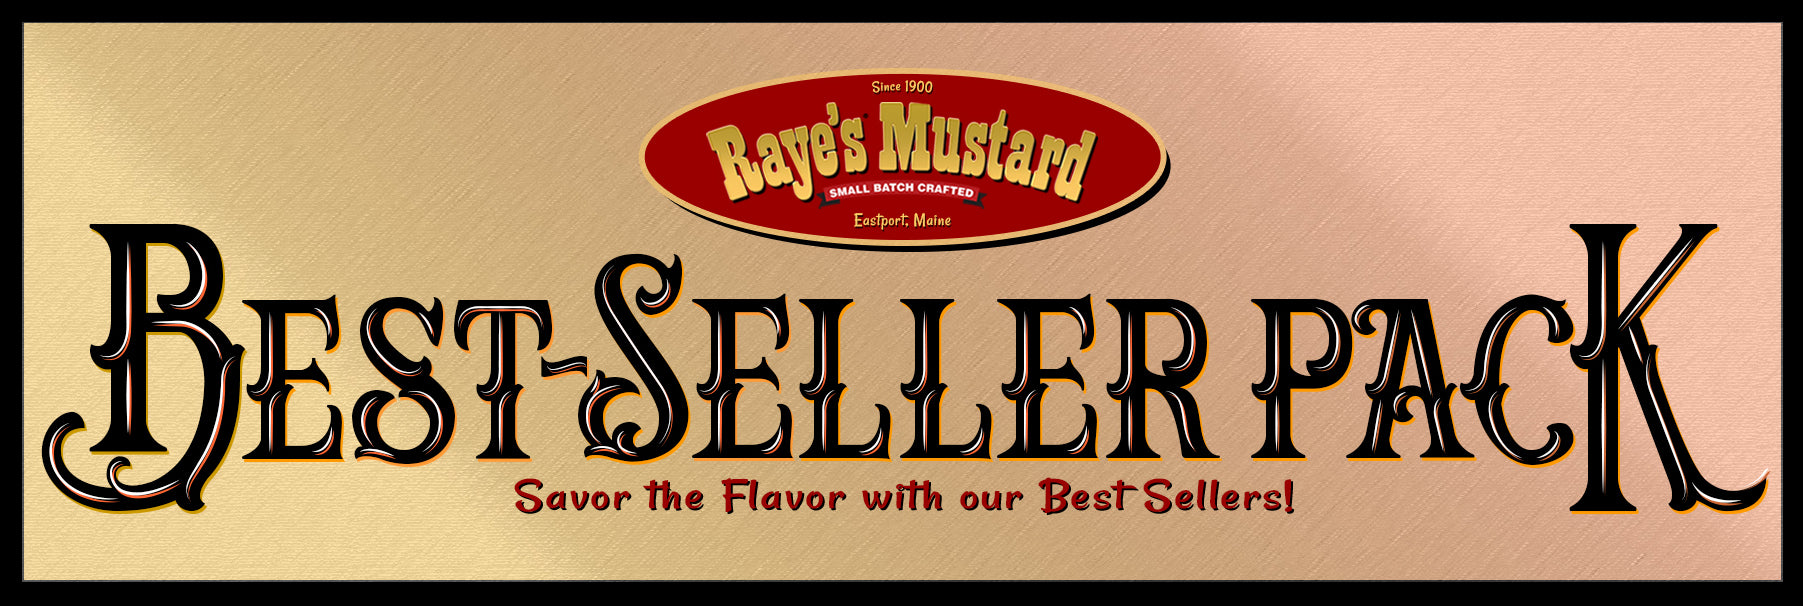 Best~Seller Pack- WITH FREE SHIPPING! - Raye's Mustard